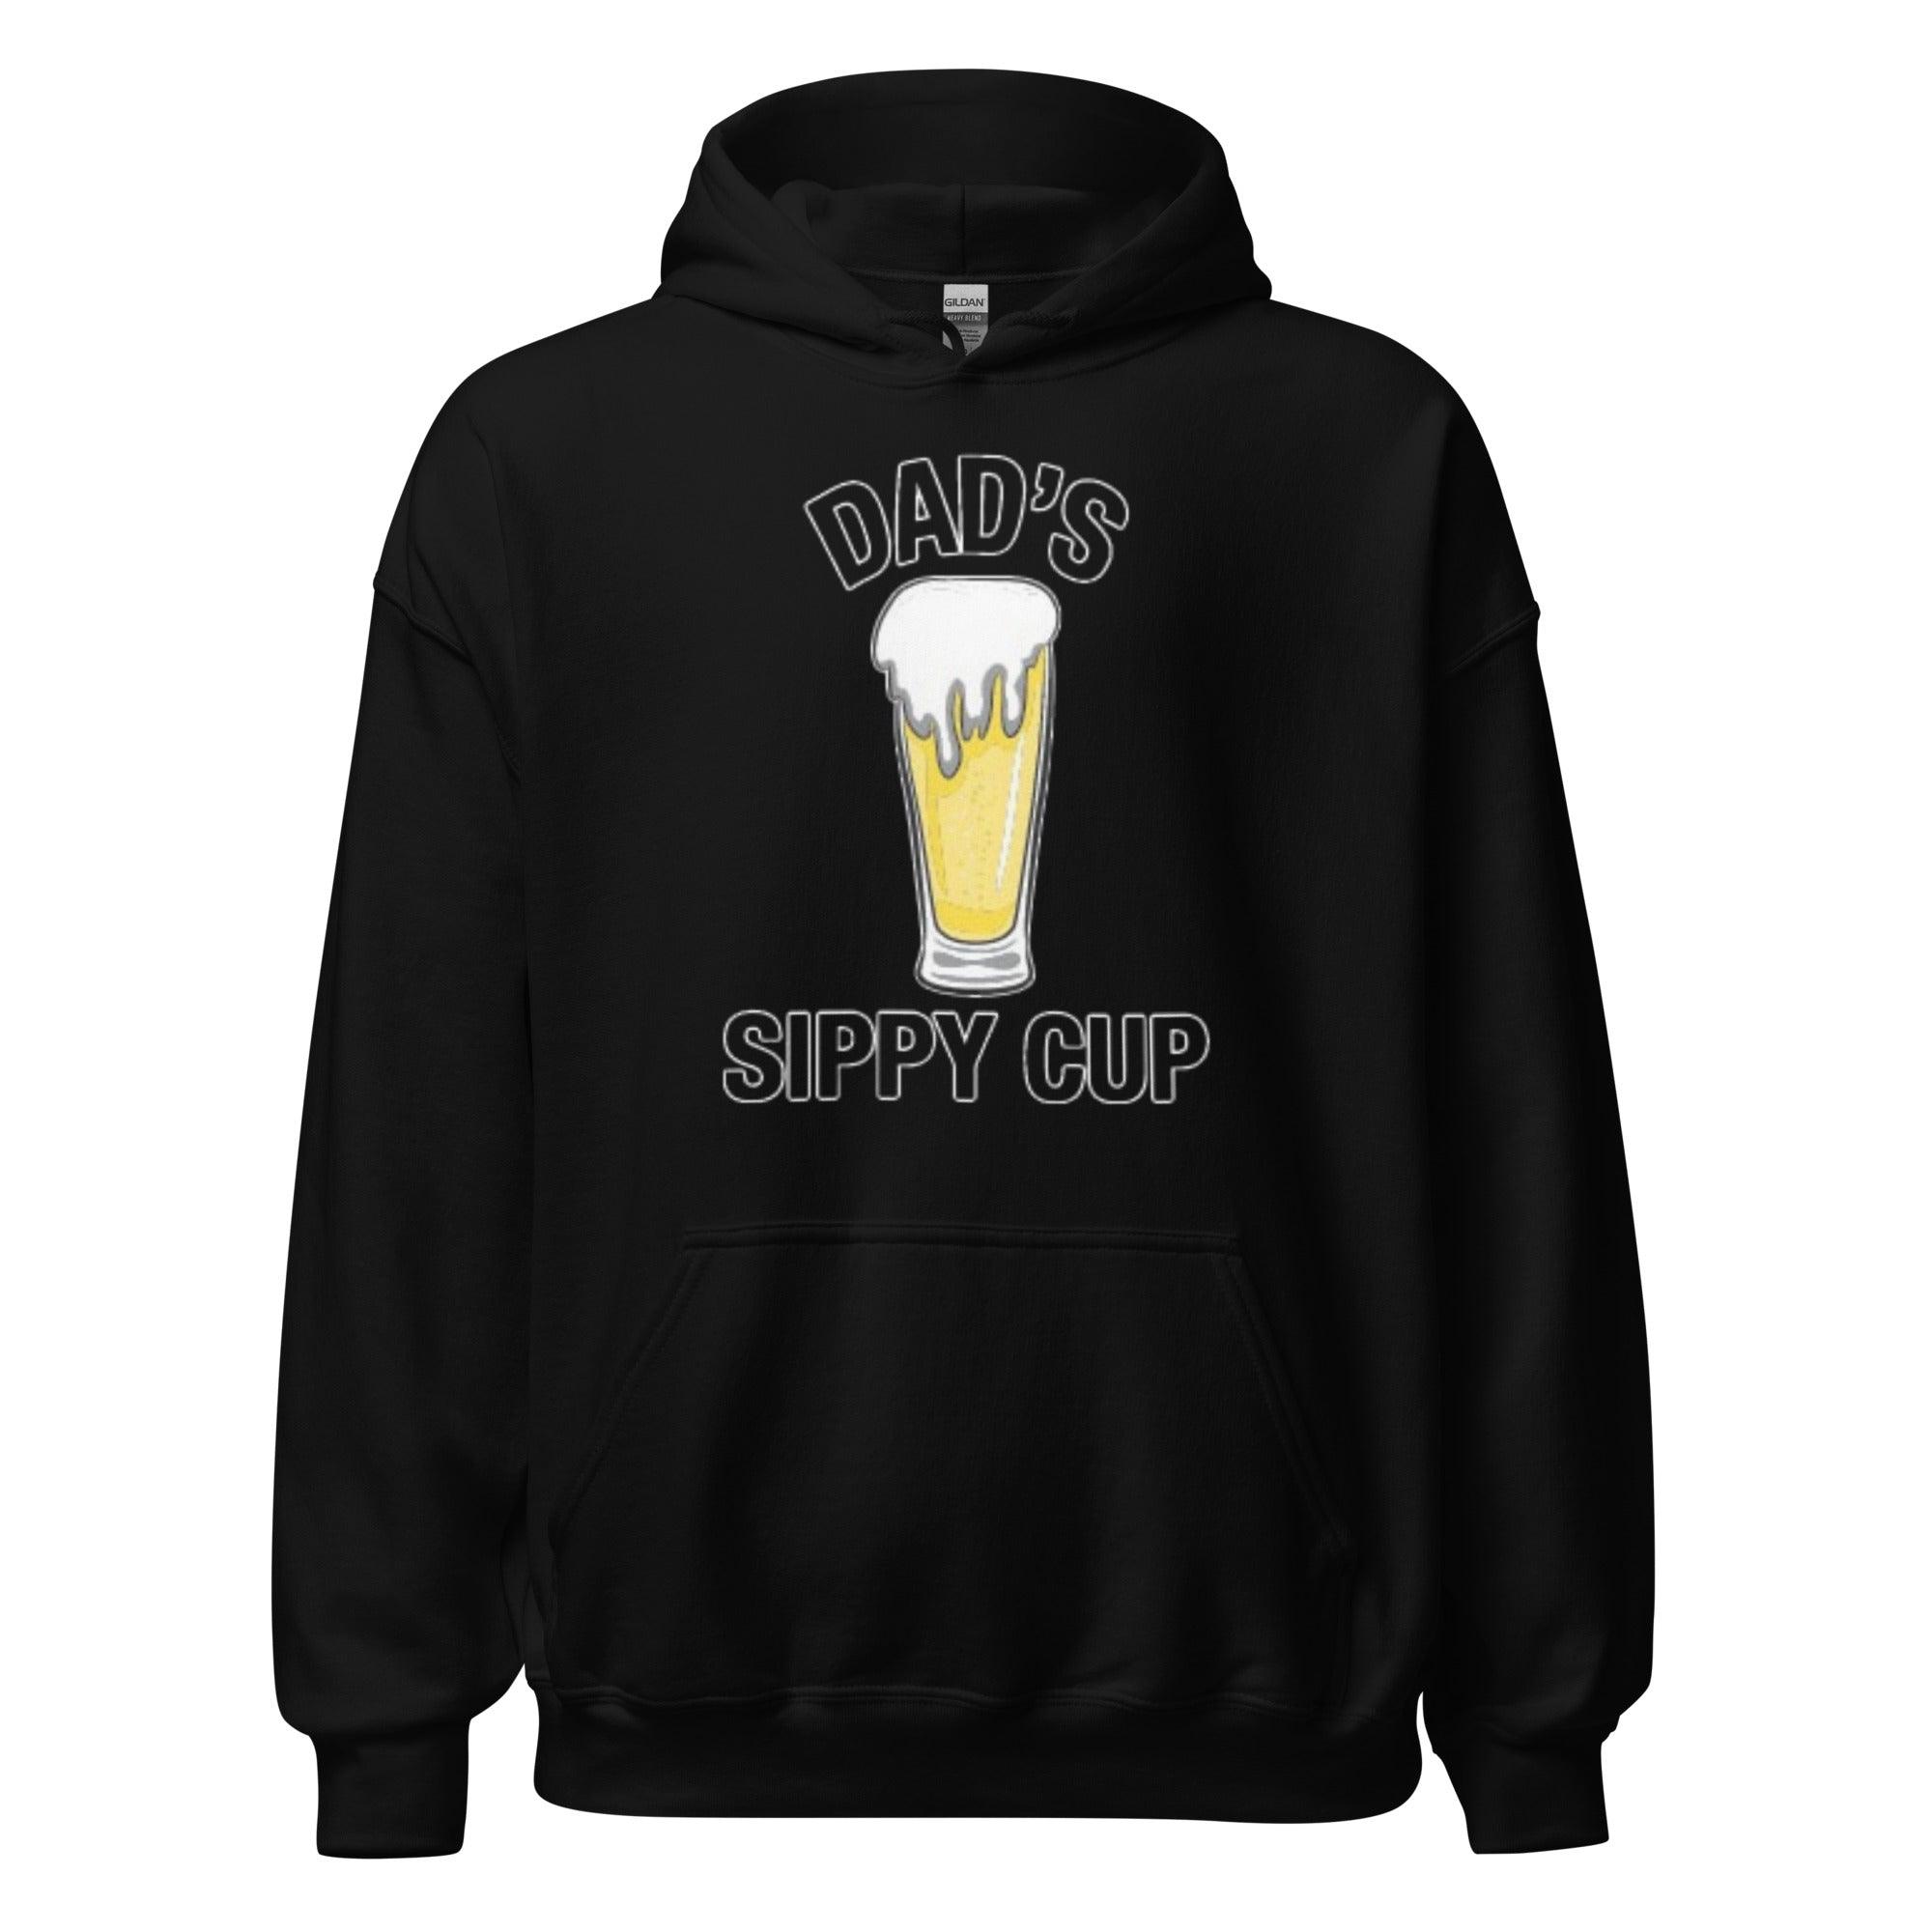 Drinking Hoodie Dad's Sippy Cup Blended Cotton Midweight Unisex Hoodie - TopKoalaTee